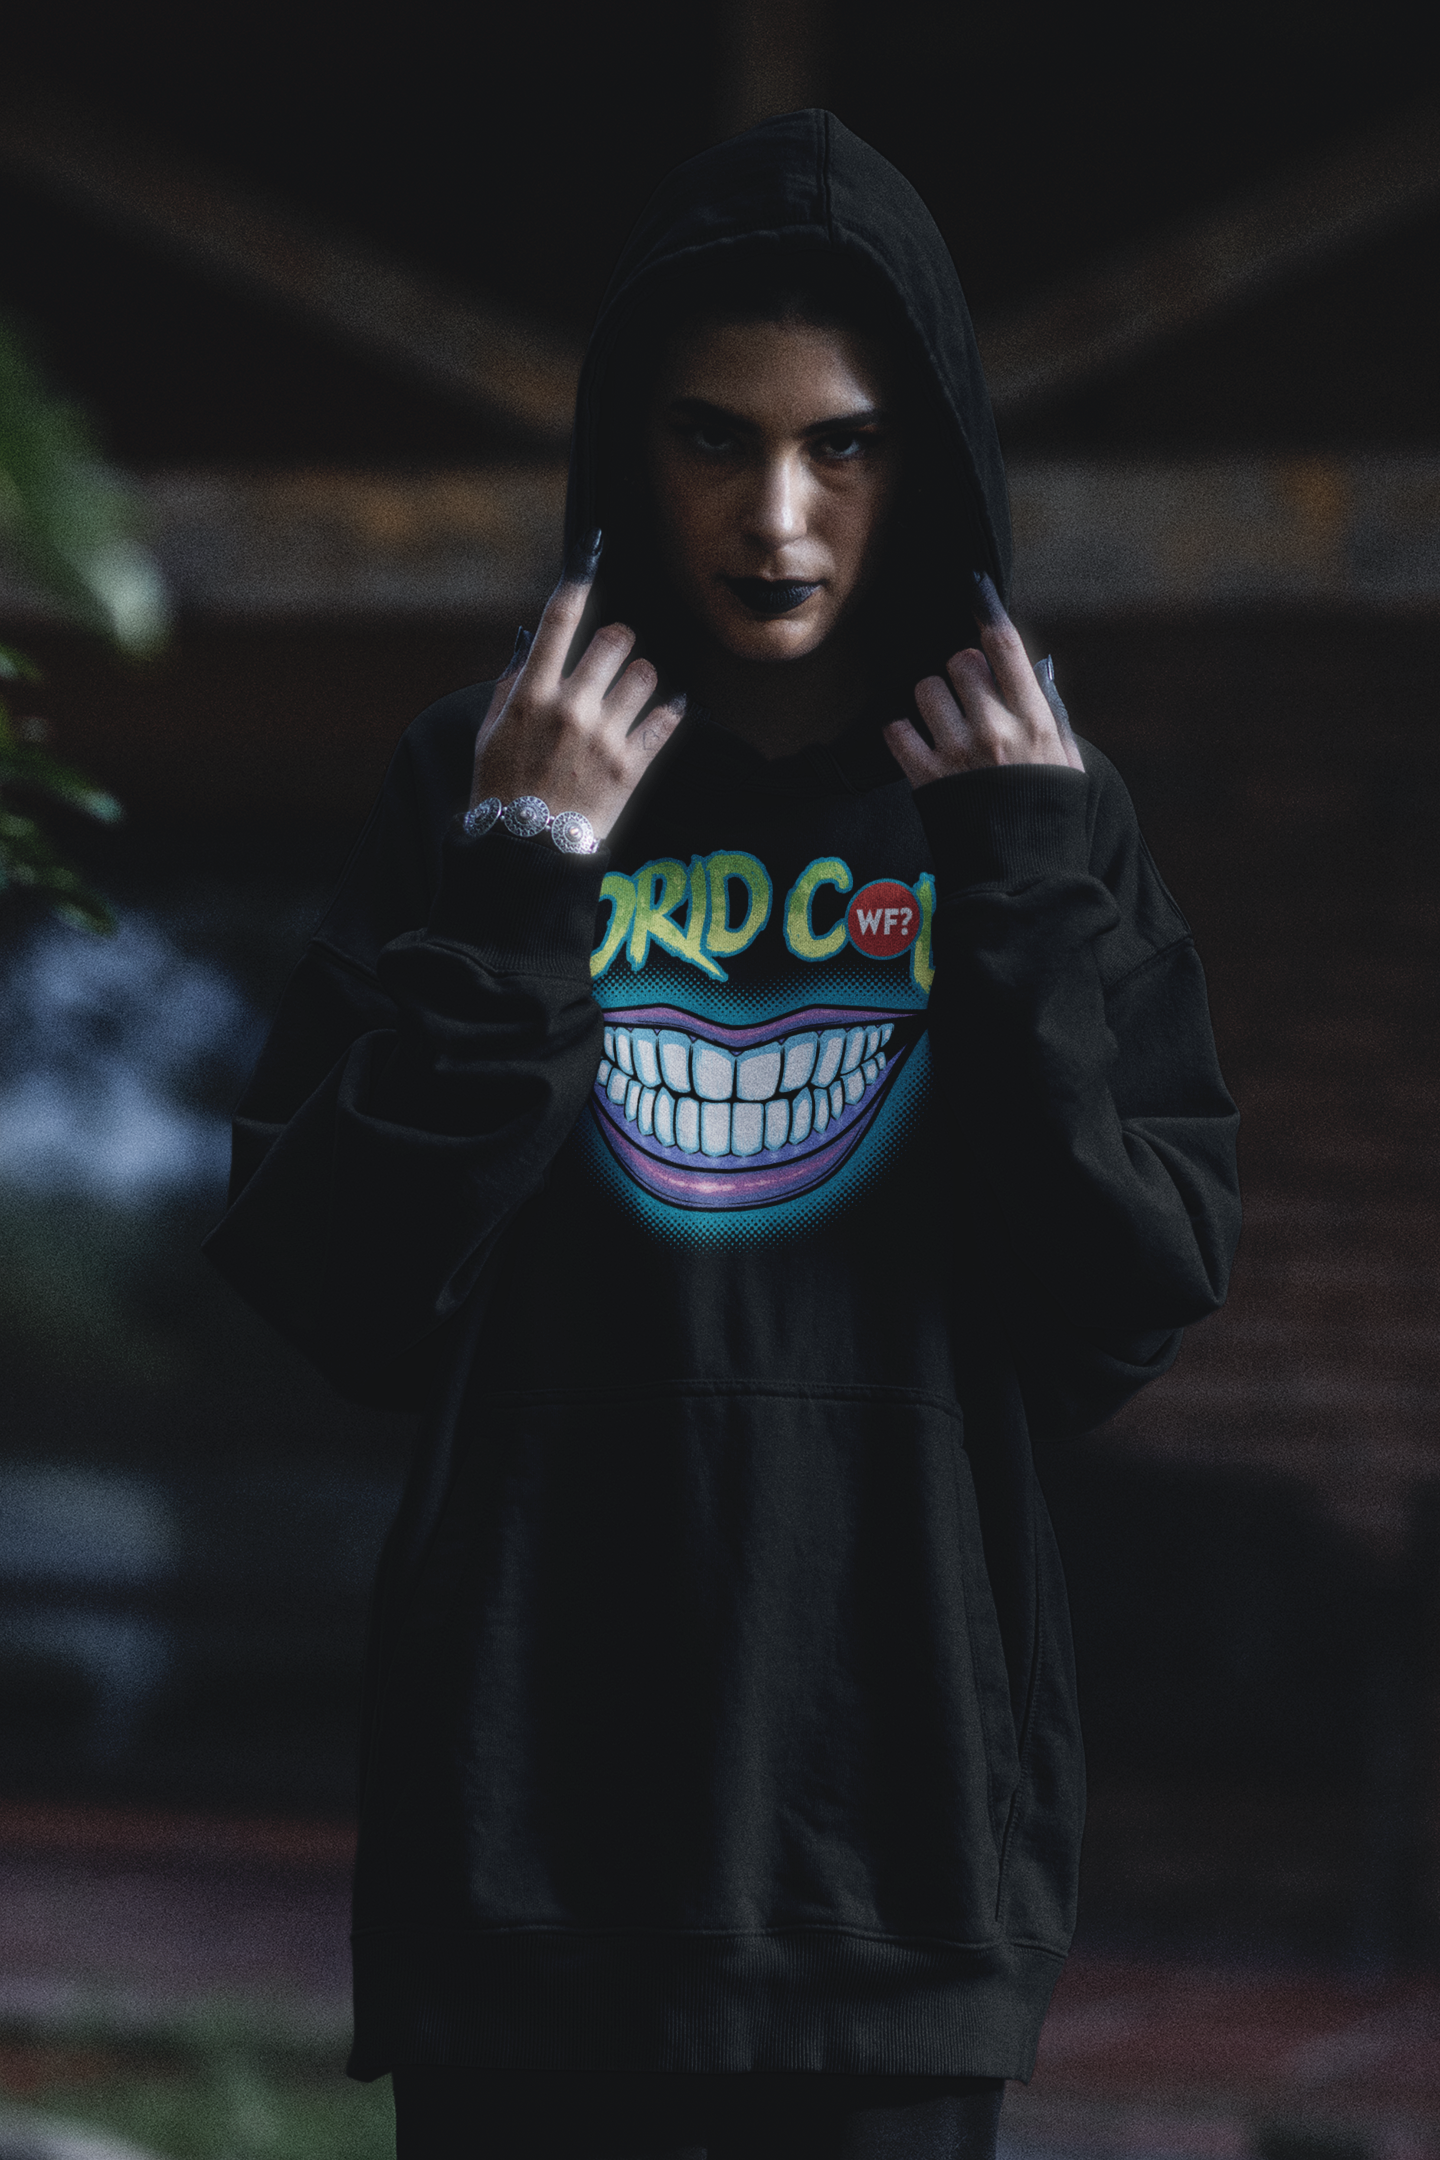 7/13 Indrid Cold Limited Hoodie